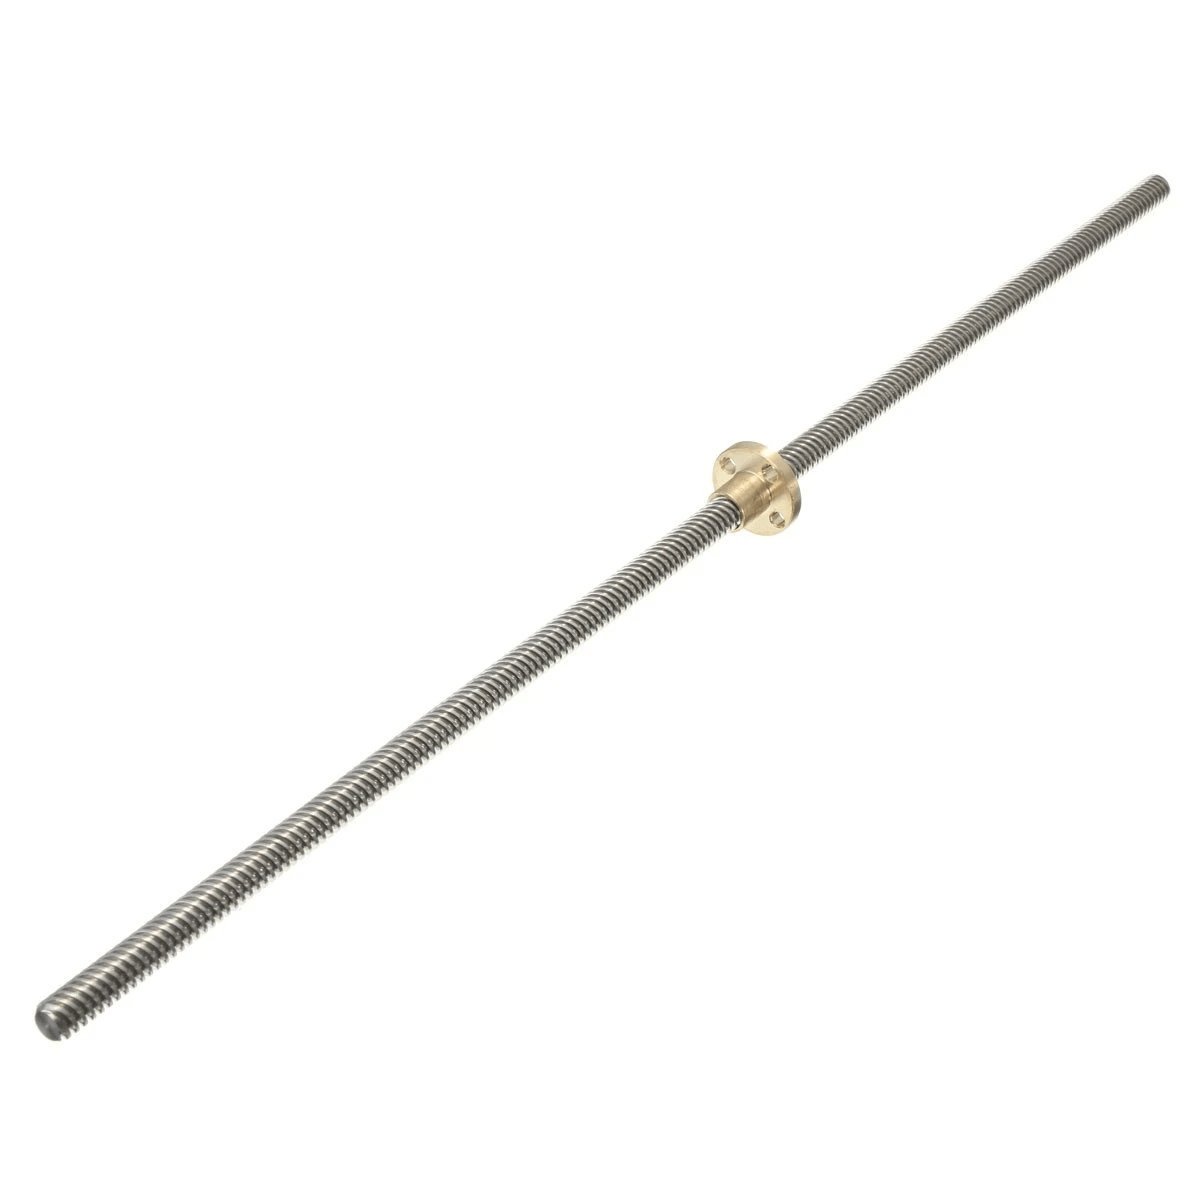 400mm Z-Axis Stainless Steel Threaded Rod Lead Screw with T8 Nut